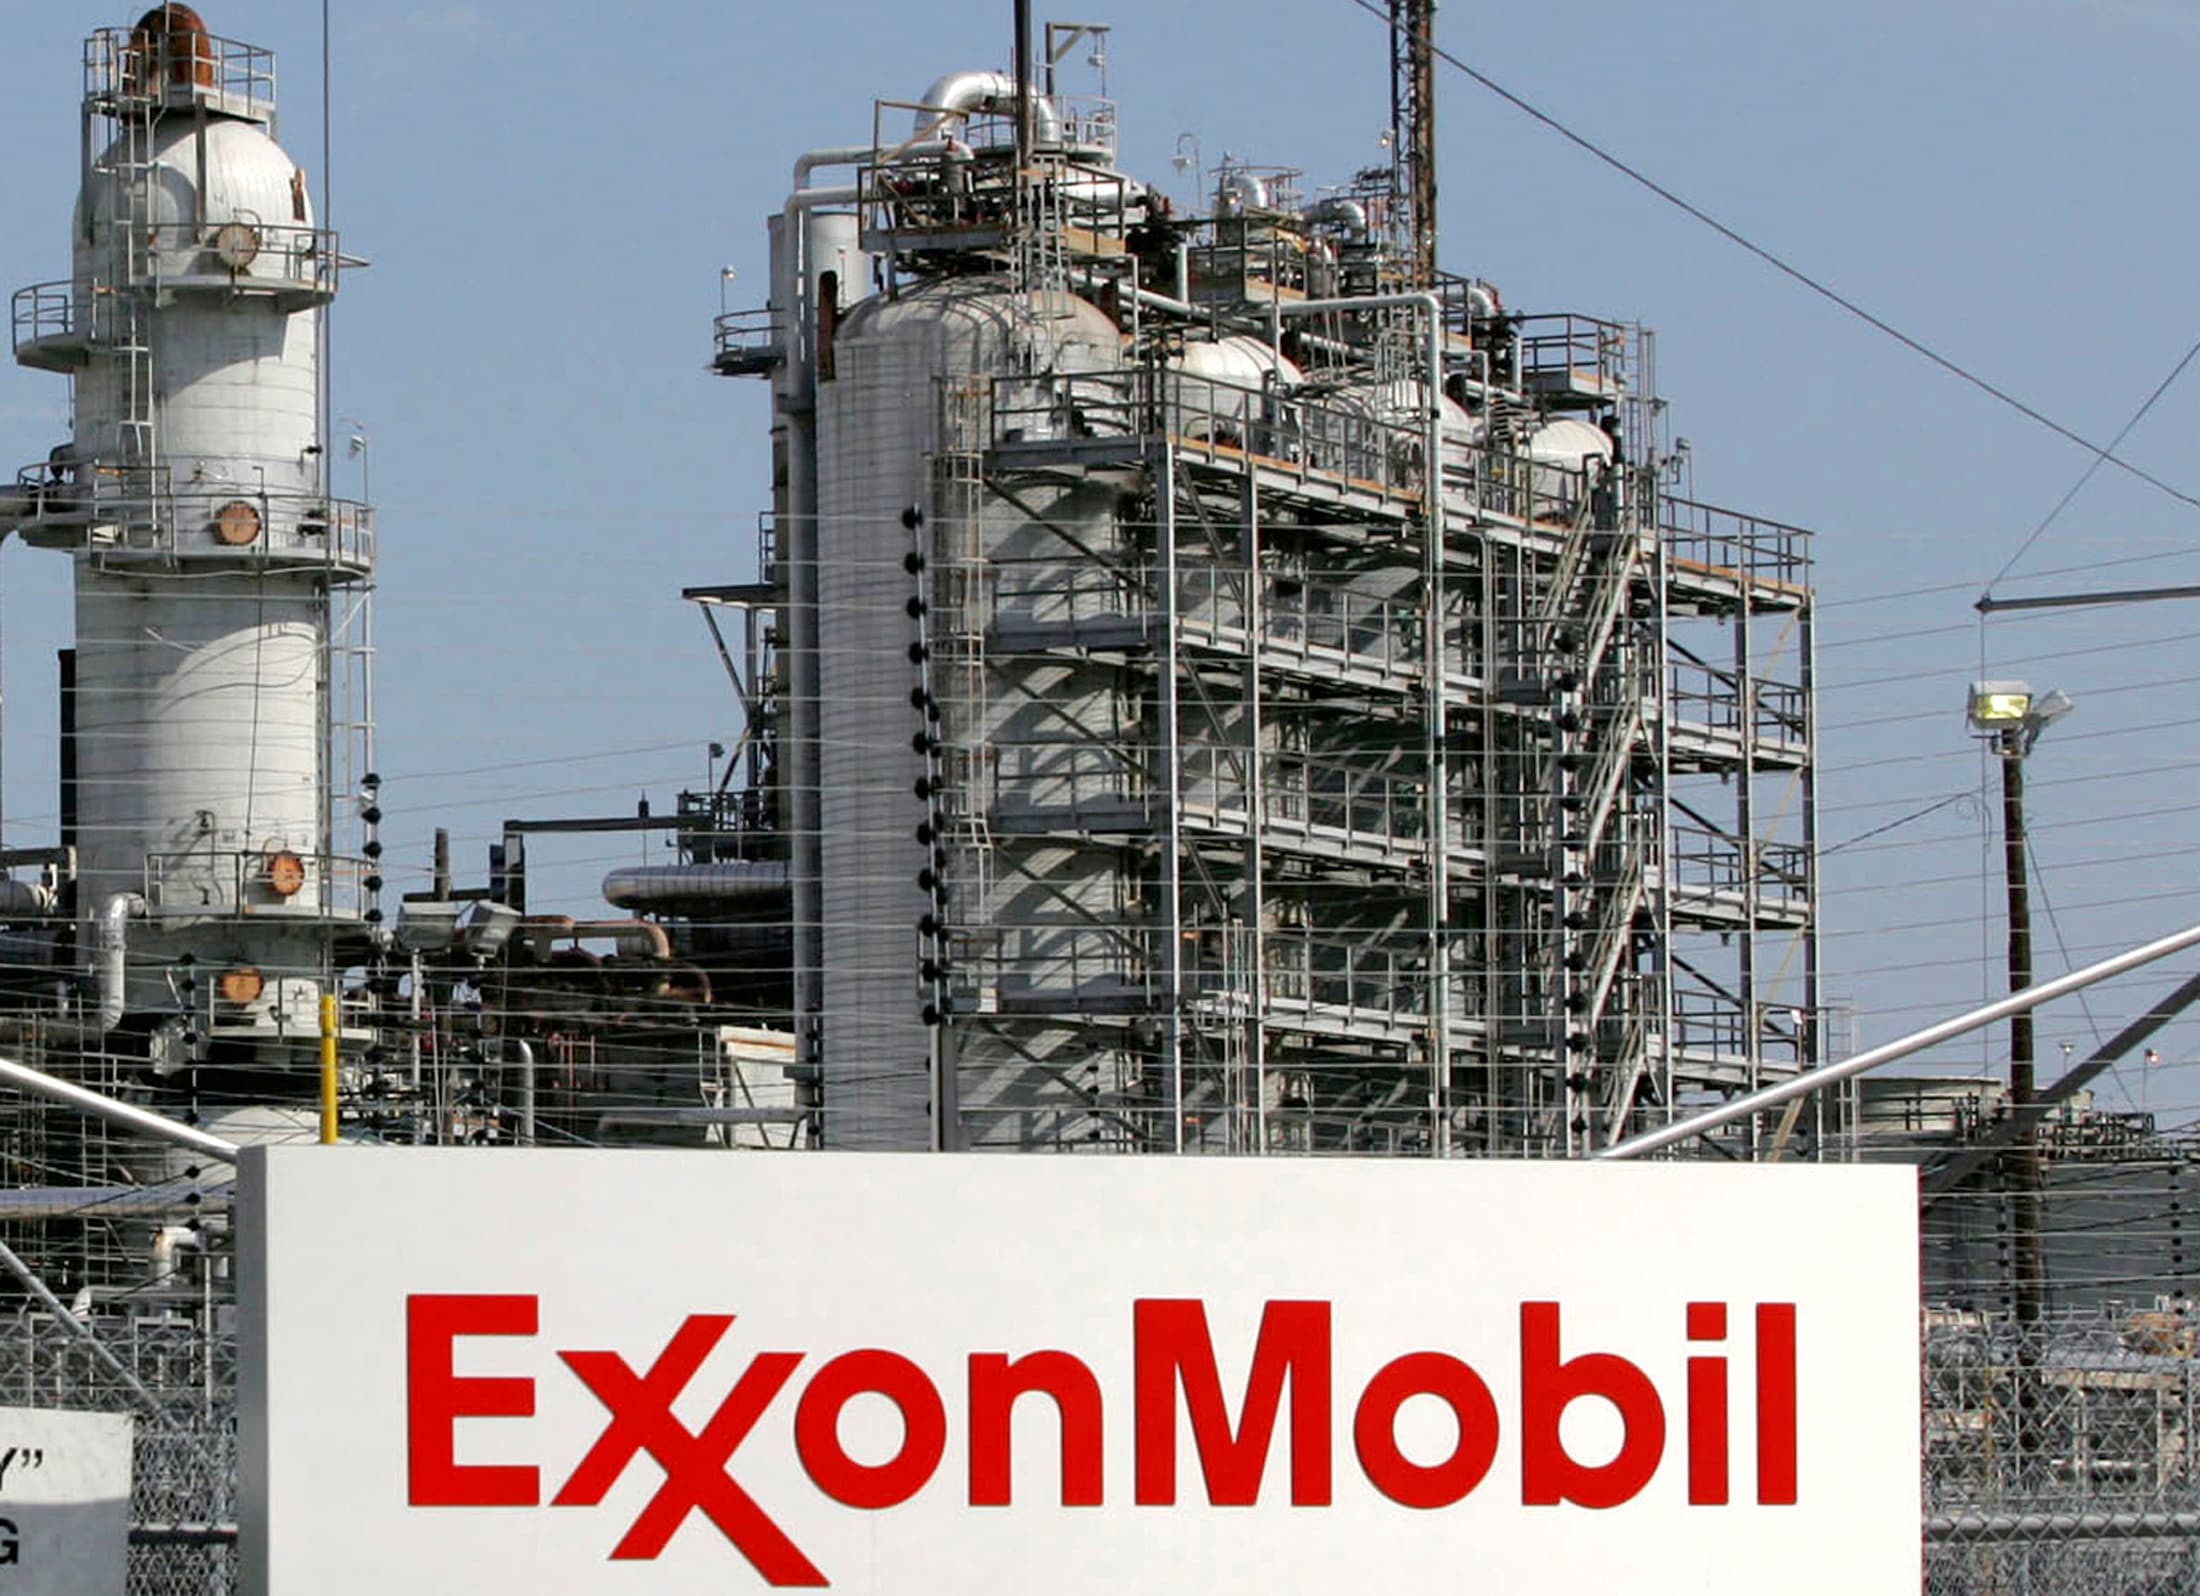 ExxonMobil has reached an agreement with the Federal Trade Commission and is set to close its $60 billion Pioneer deal